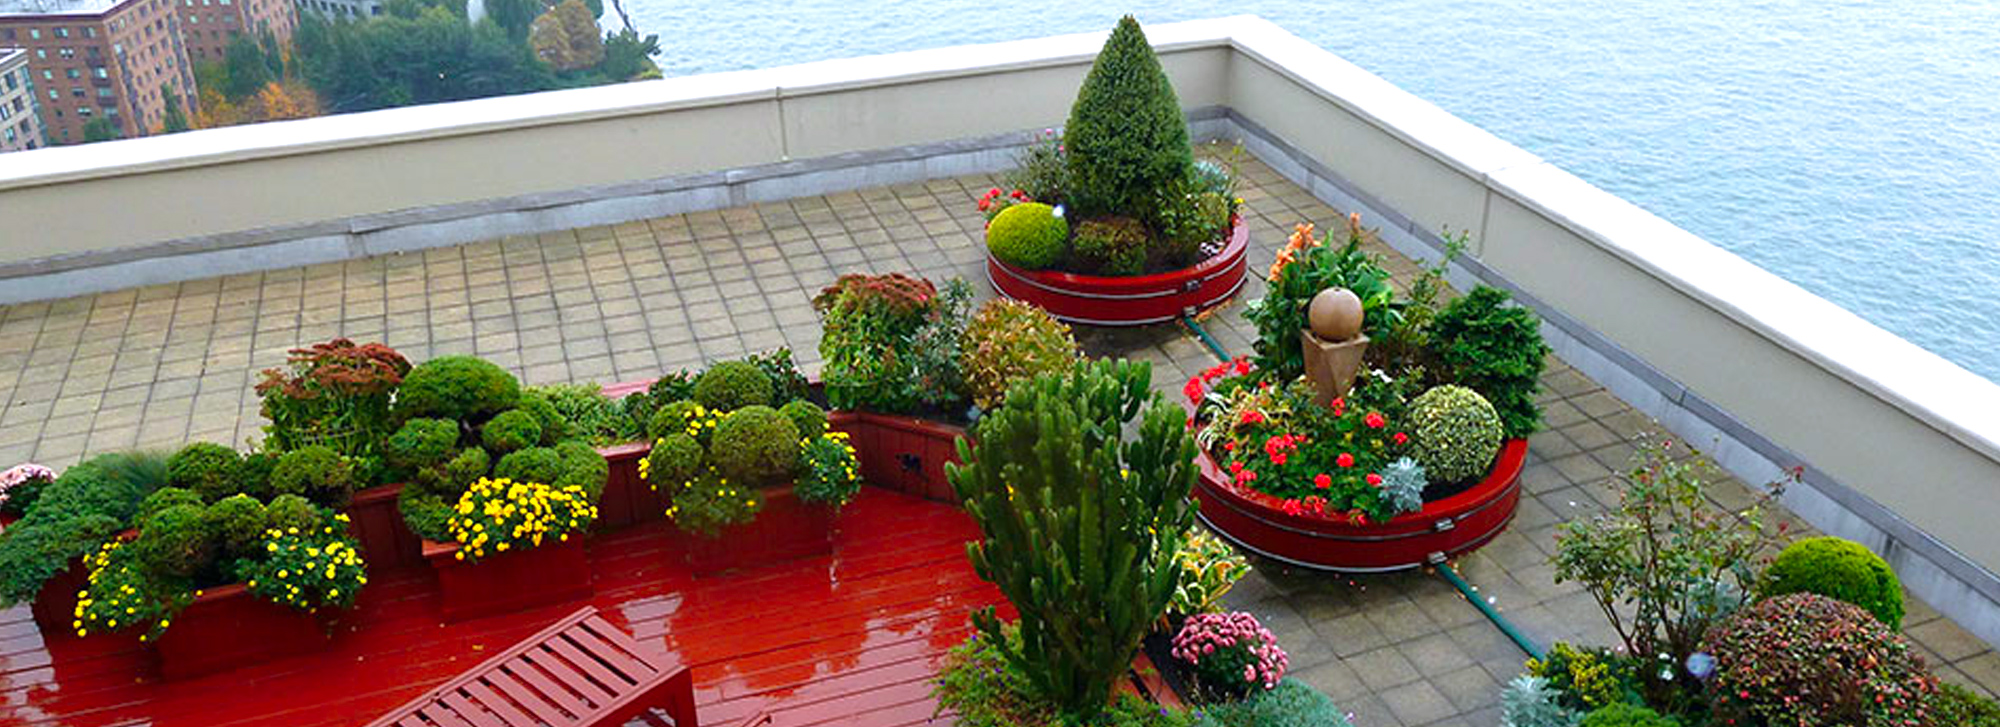 Rooftop and Balcony Gardens 